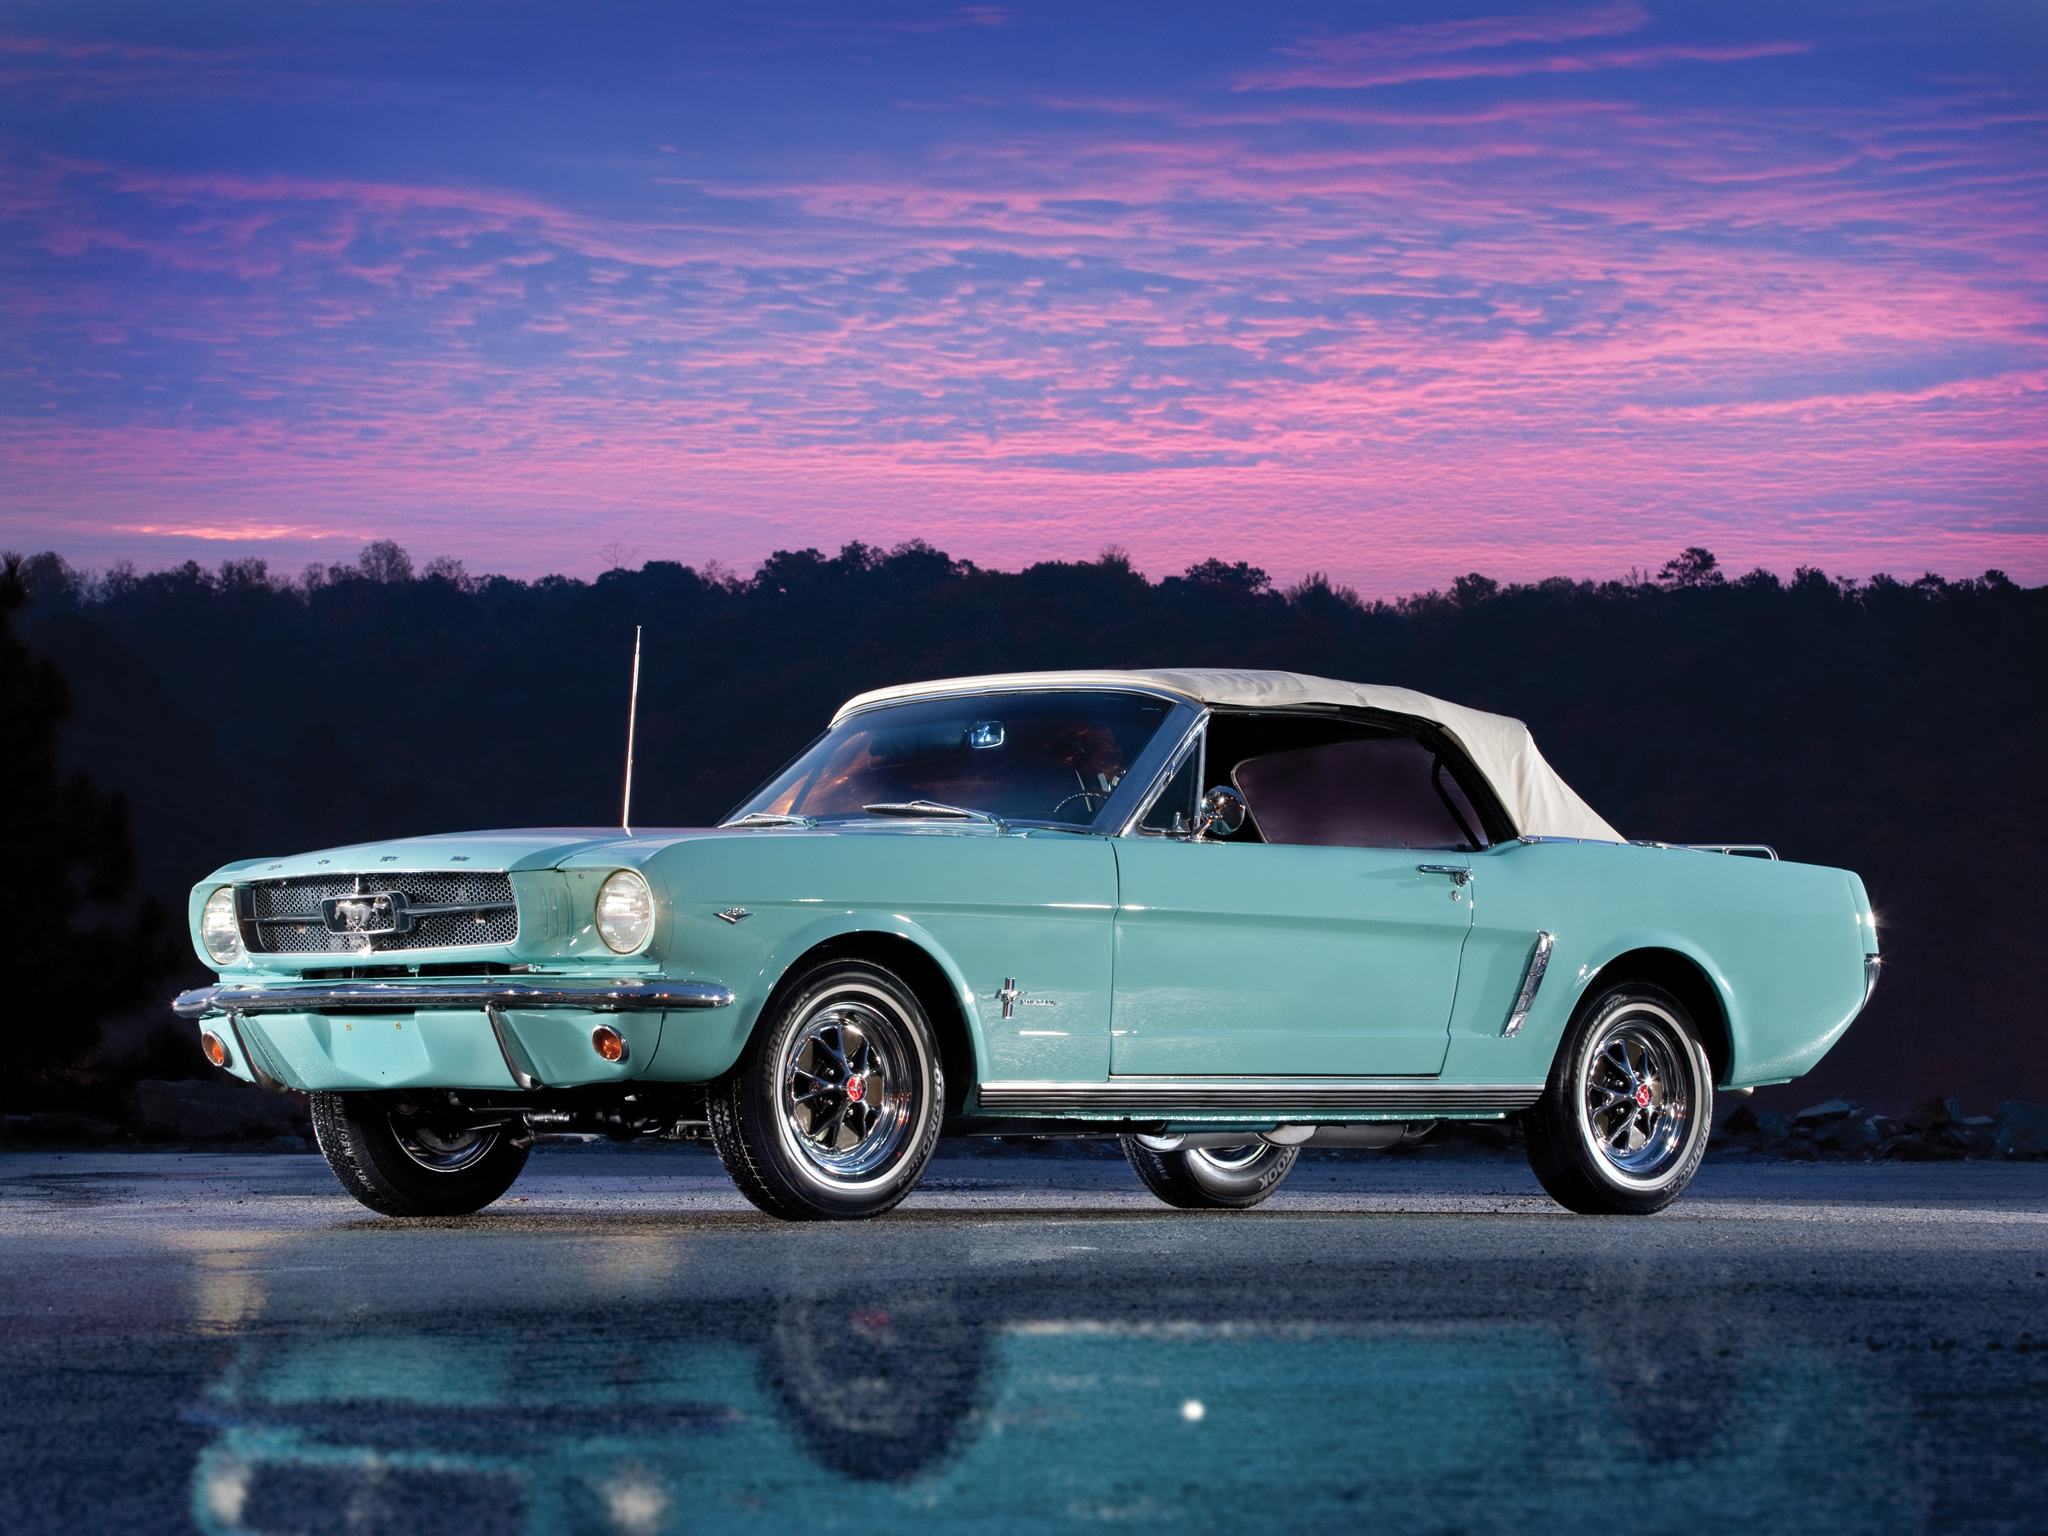 Baily Clark's Car Photo Gallery - Old Mustang